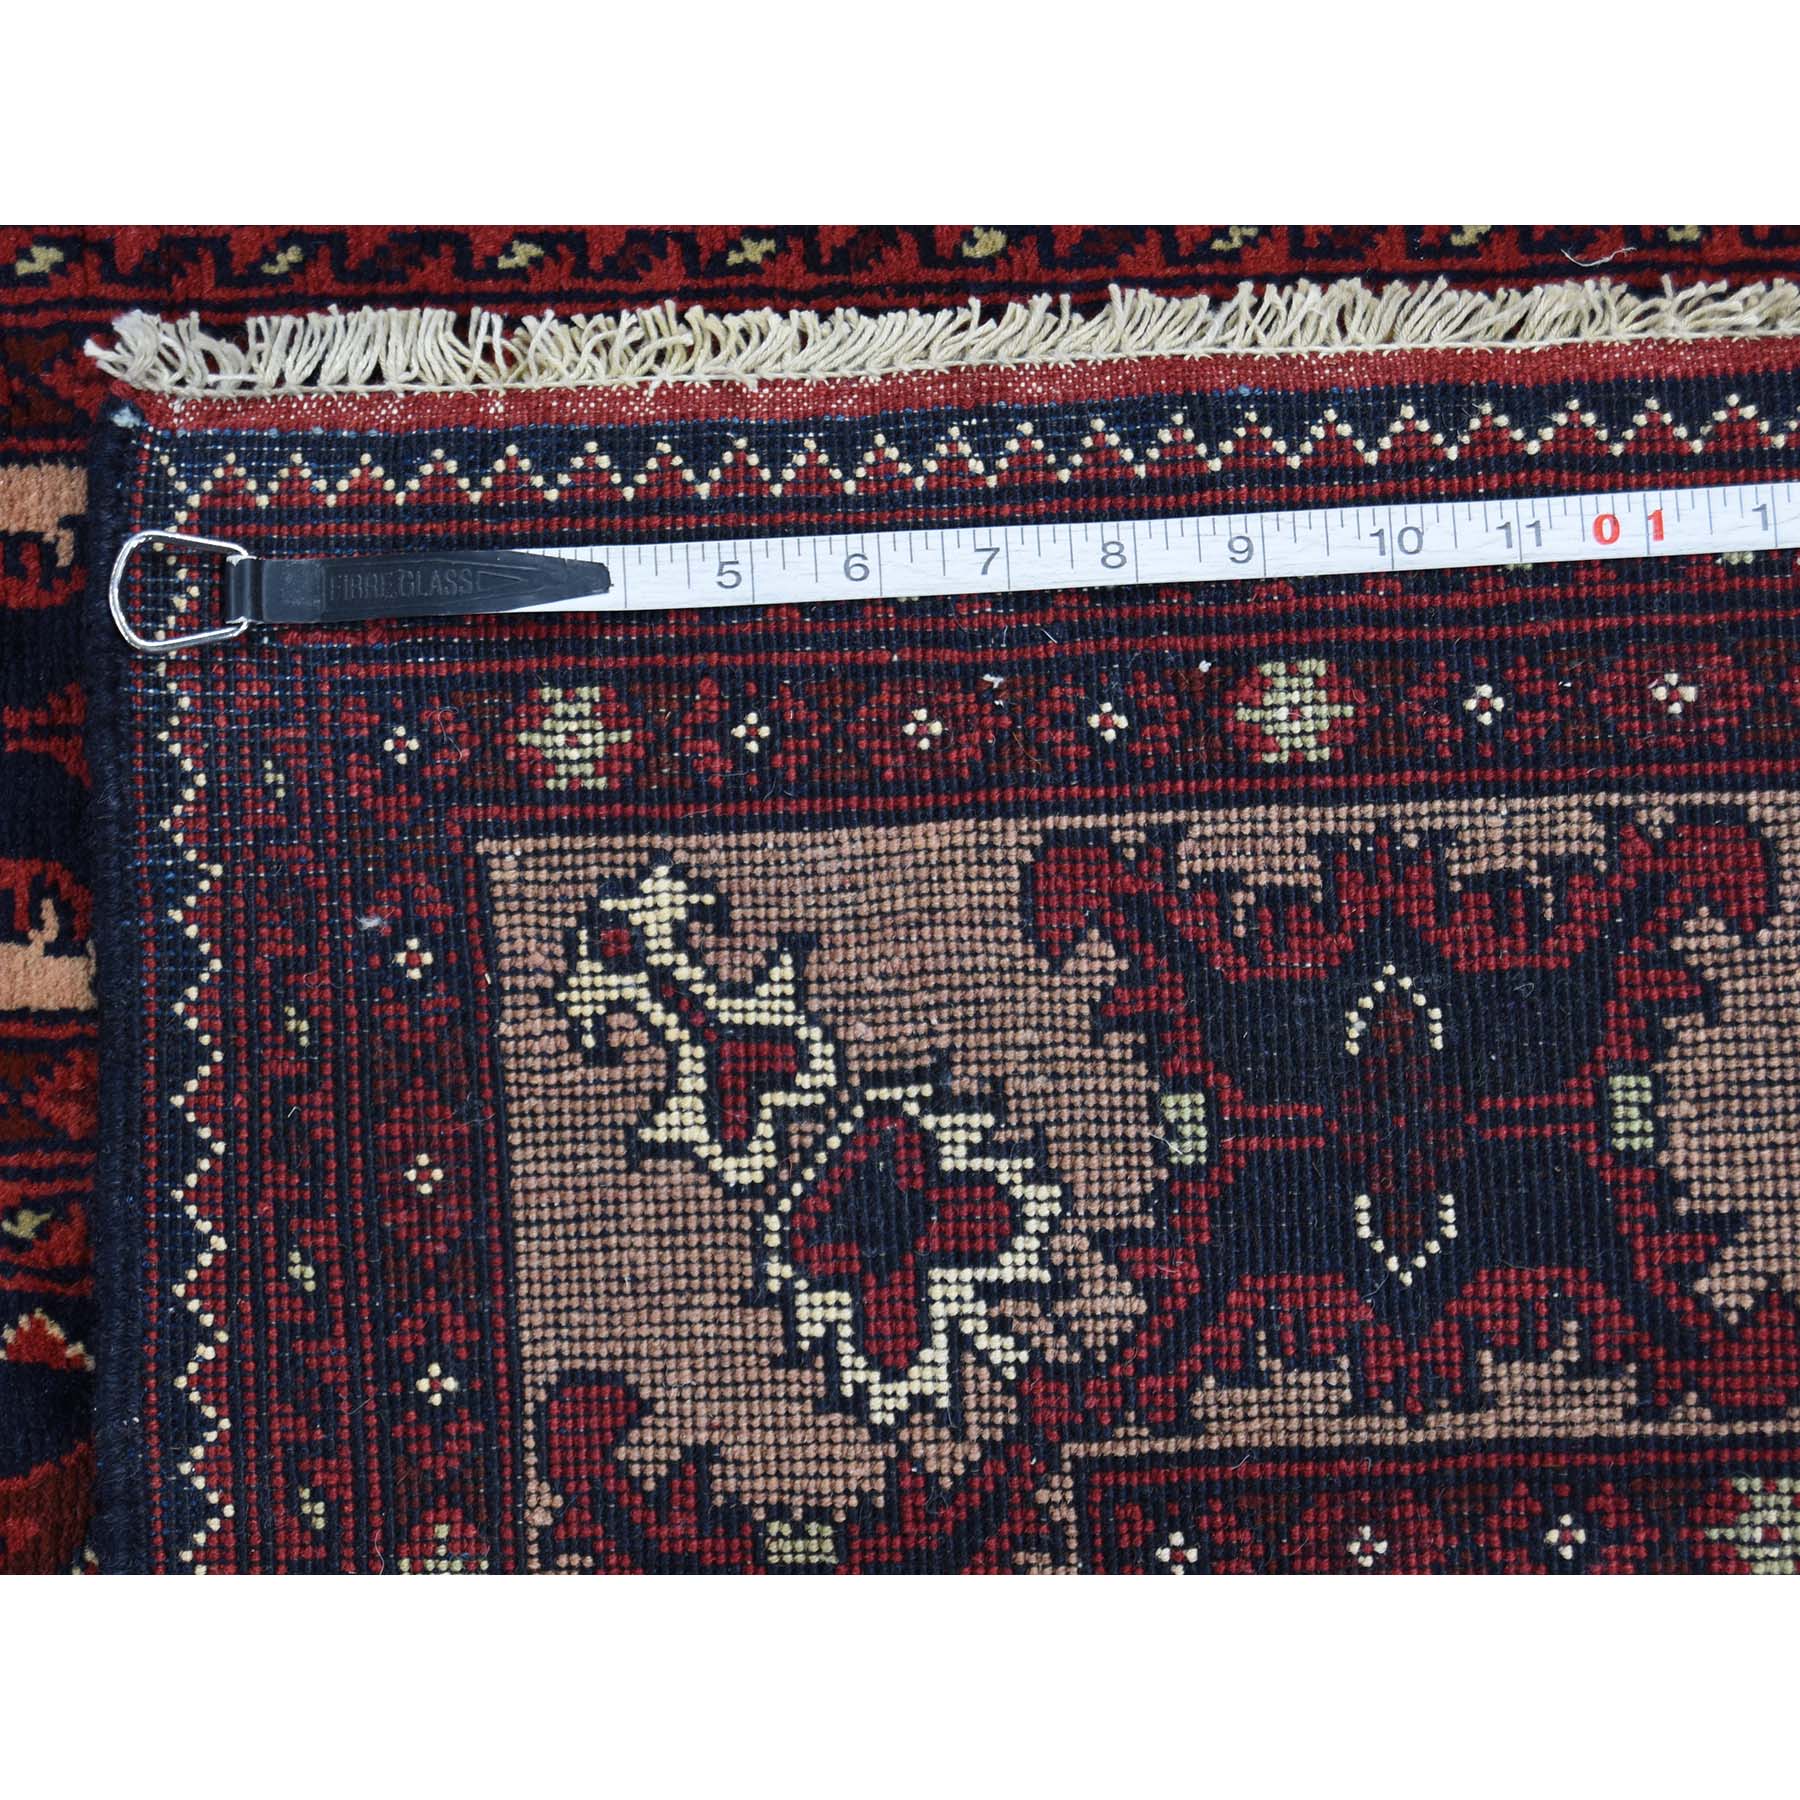 3-x19- 100 Percent Wool Hand Knotted Afghan XL Runner Oriental Rug 